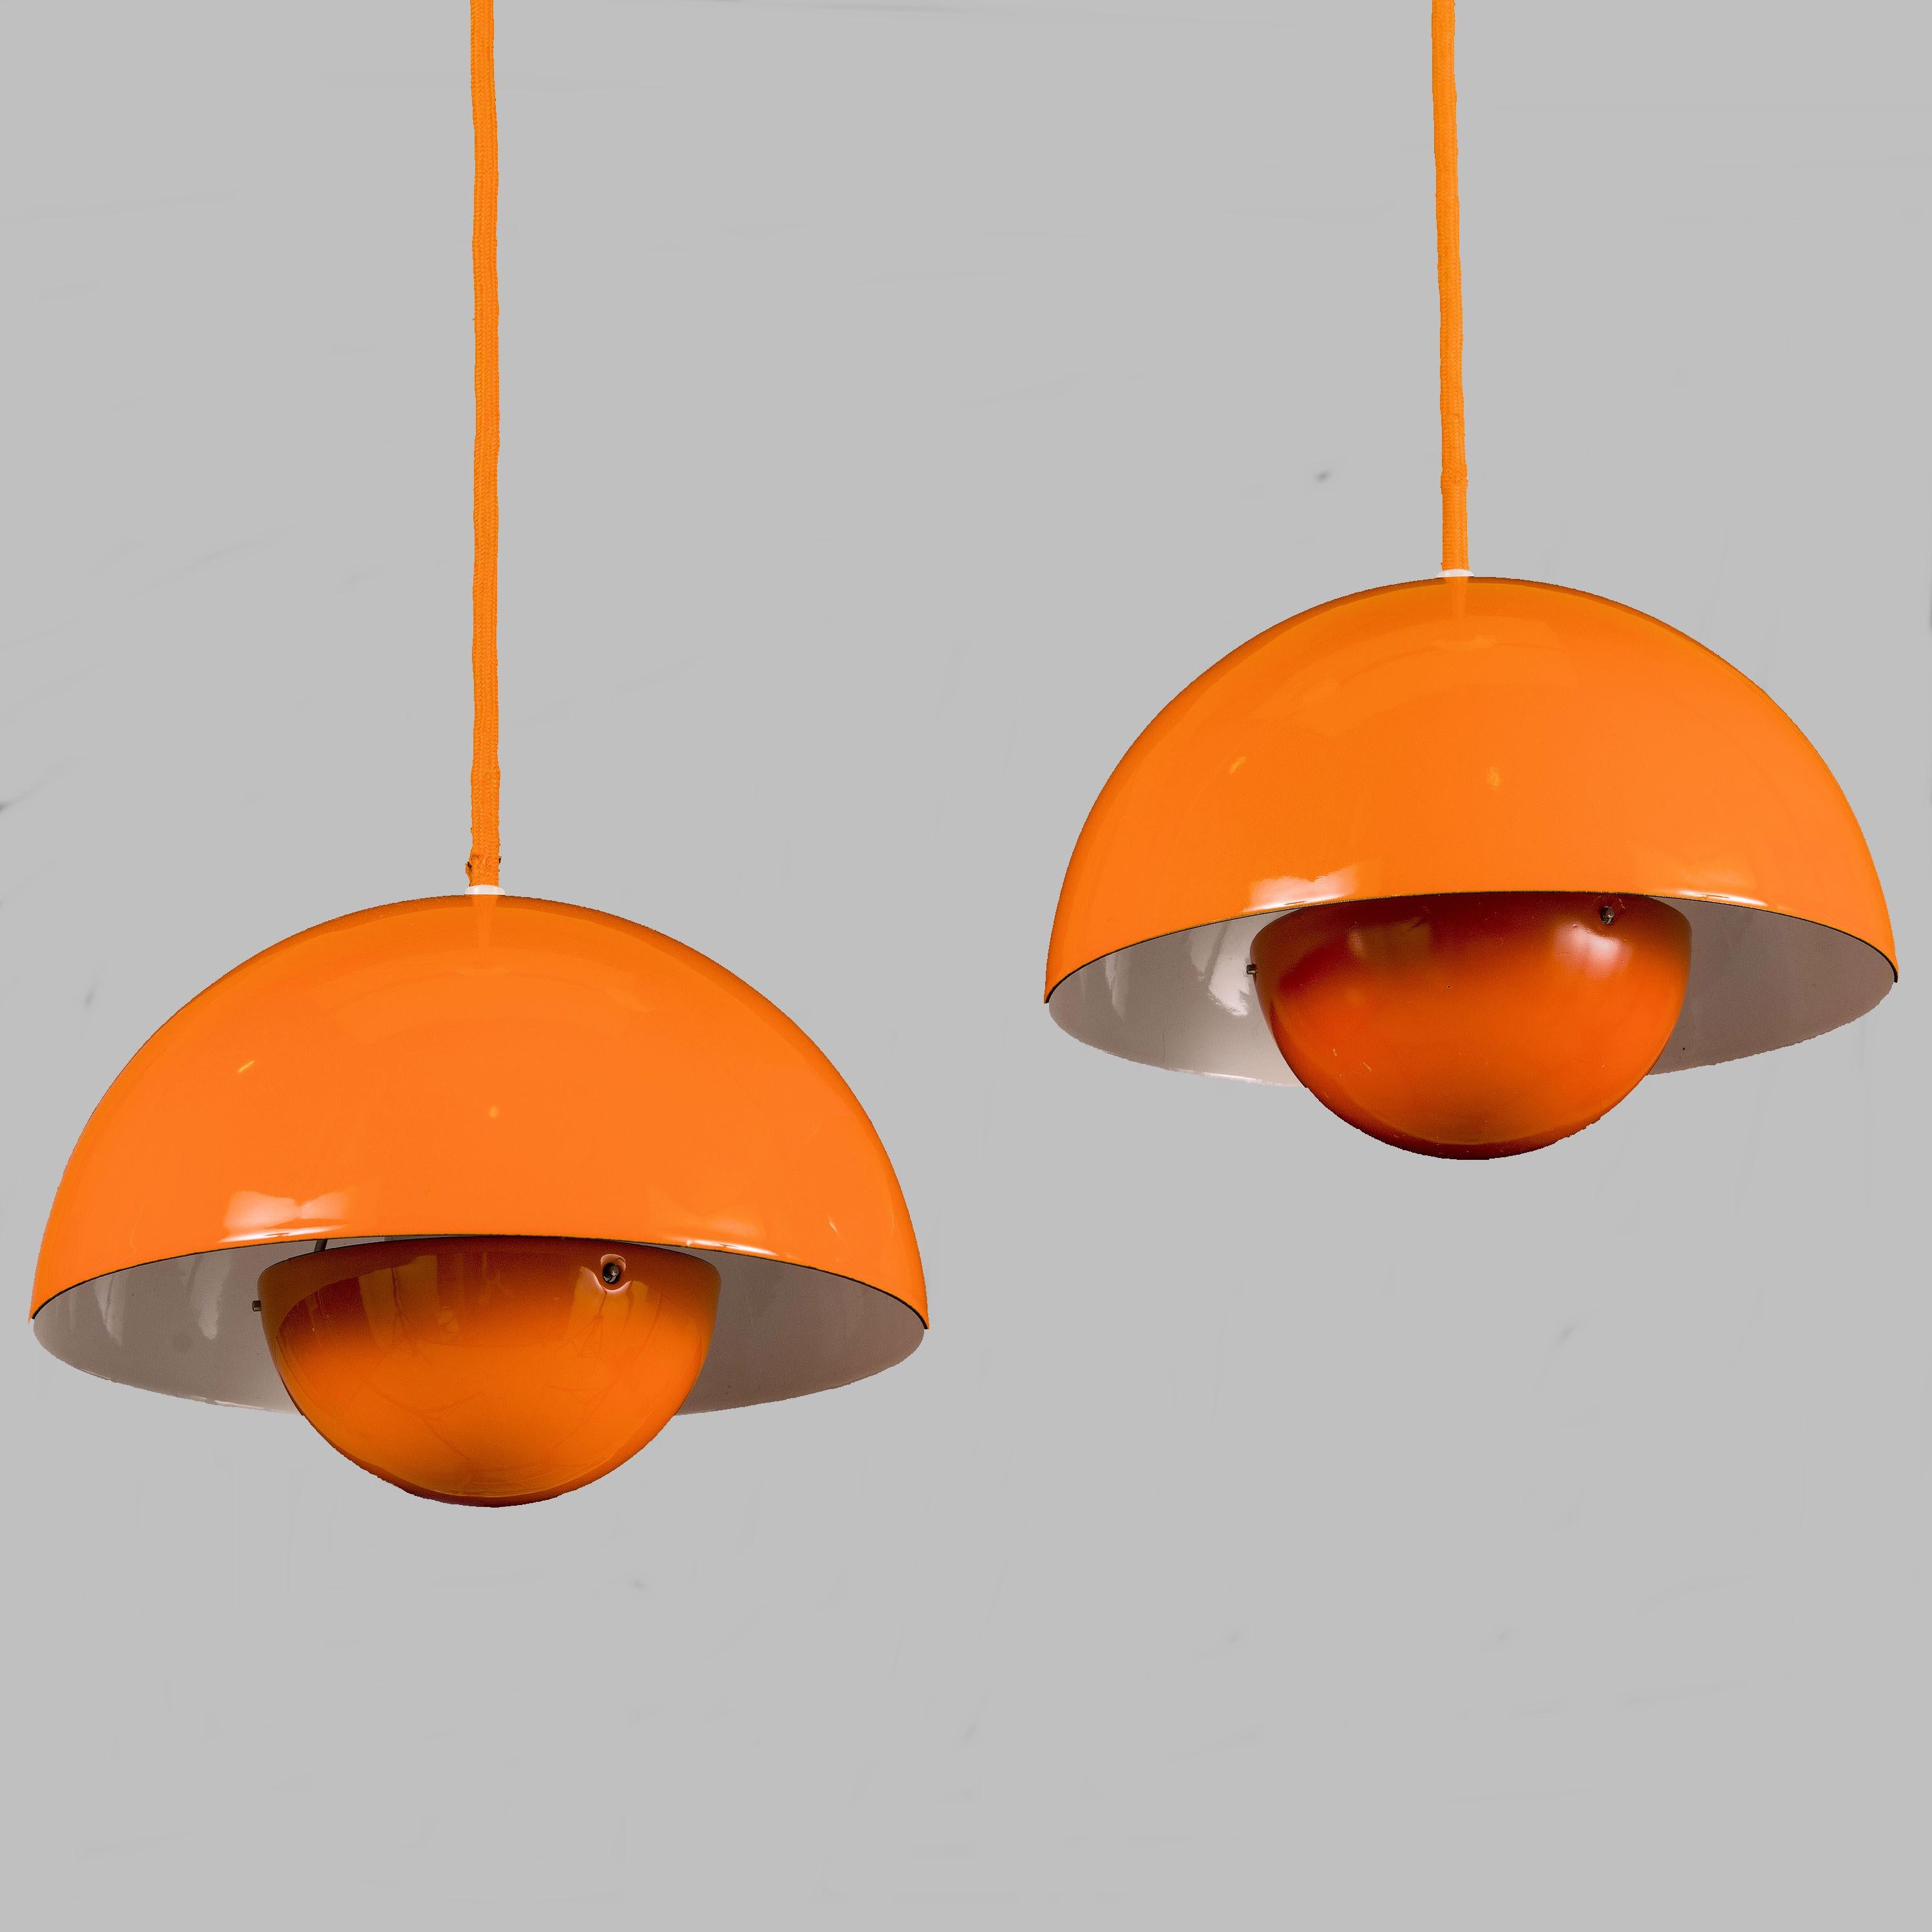 Verner Panton pair of first edition Danish flowerpot pendants by Louis Poulsen designed for Louis Poulsen in 1969.

This set of two orange or yellow pendant lights are the early Enamel version of the Panton flowerpot model and feature an orange